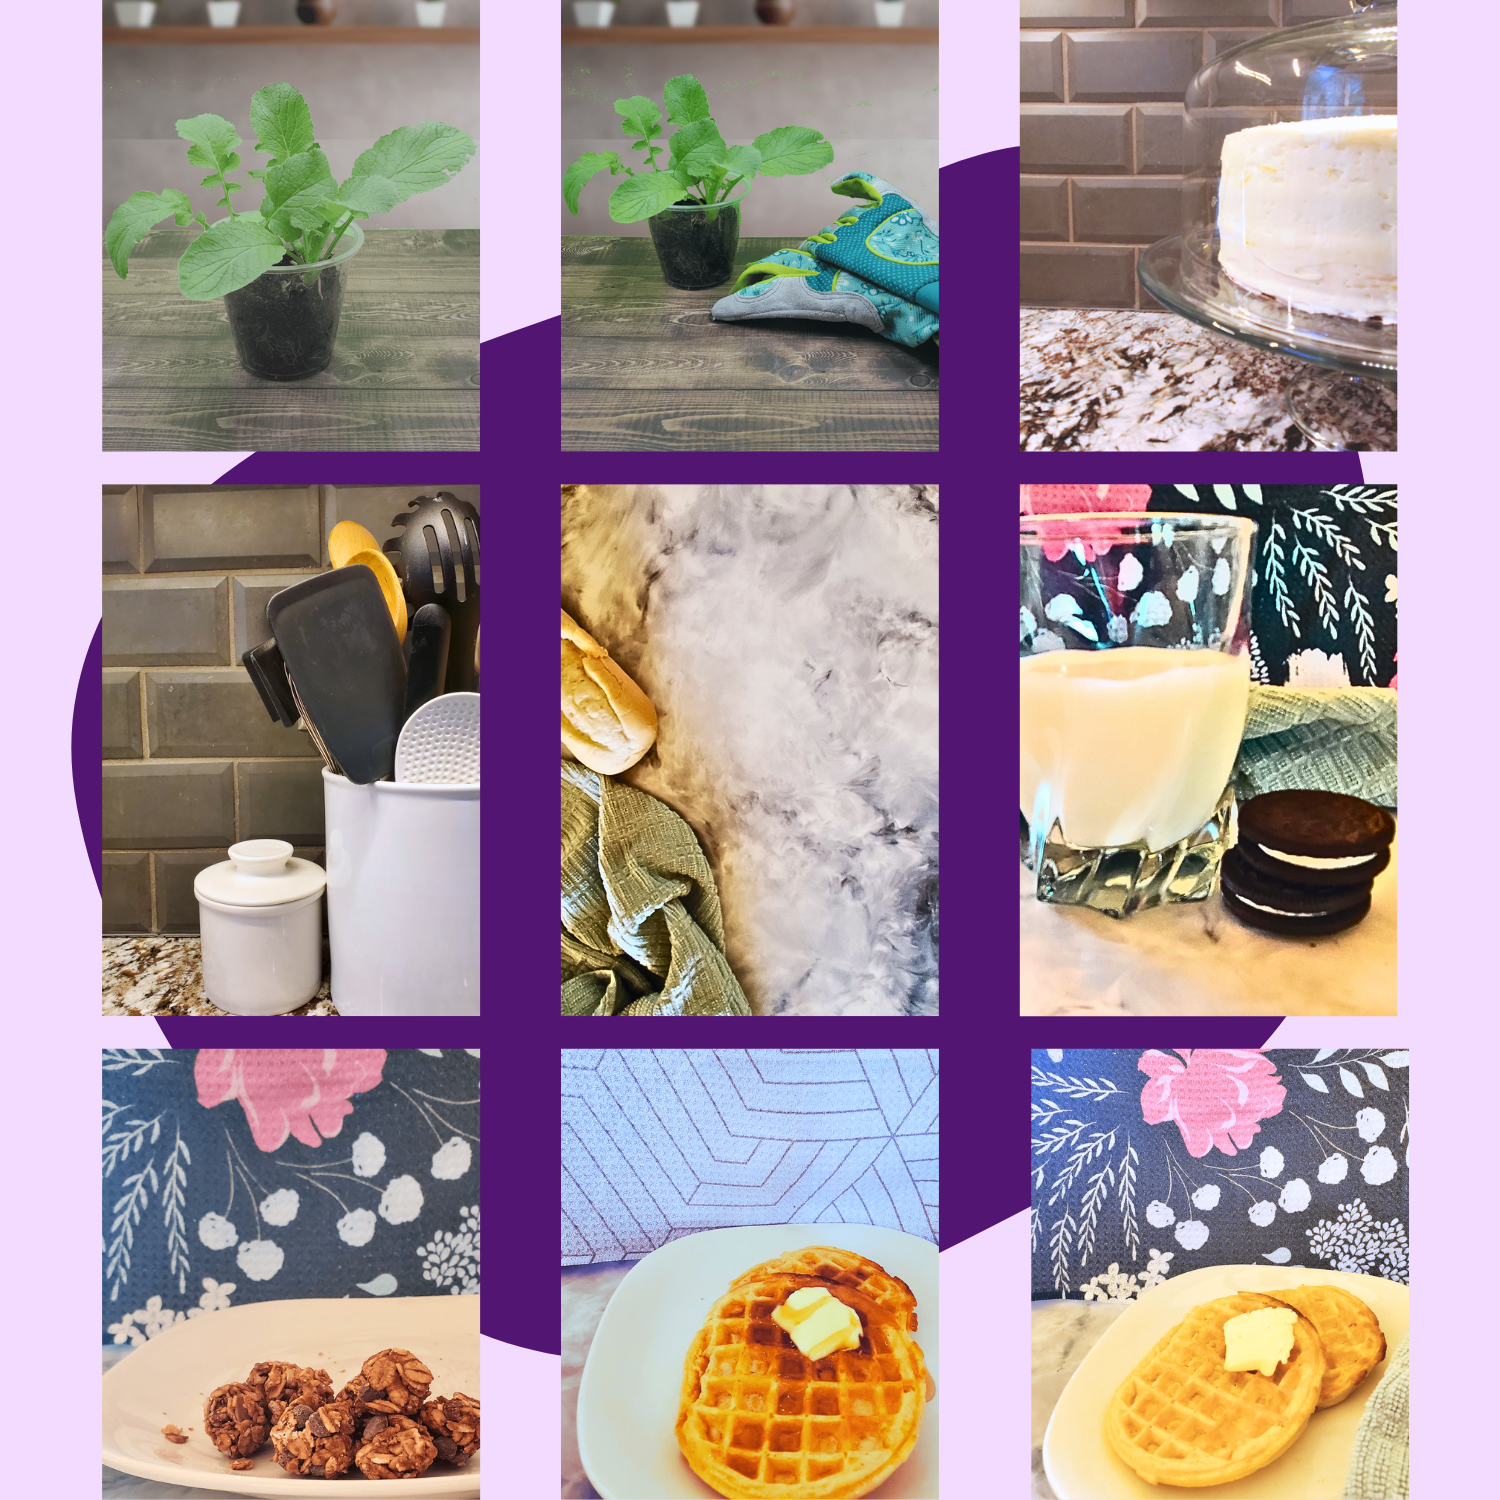 A collage of pictures of Food, Cooking, and Gardening Themed Stock Photos (set of 25) by Blogger Breakthrough Summit.